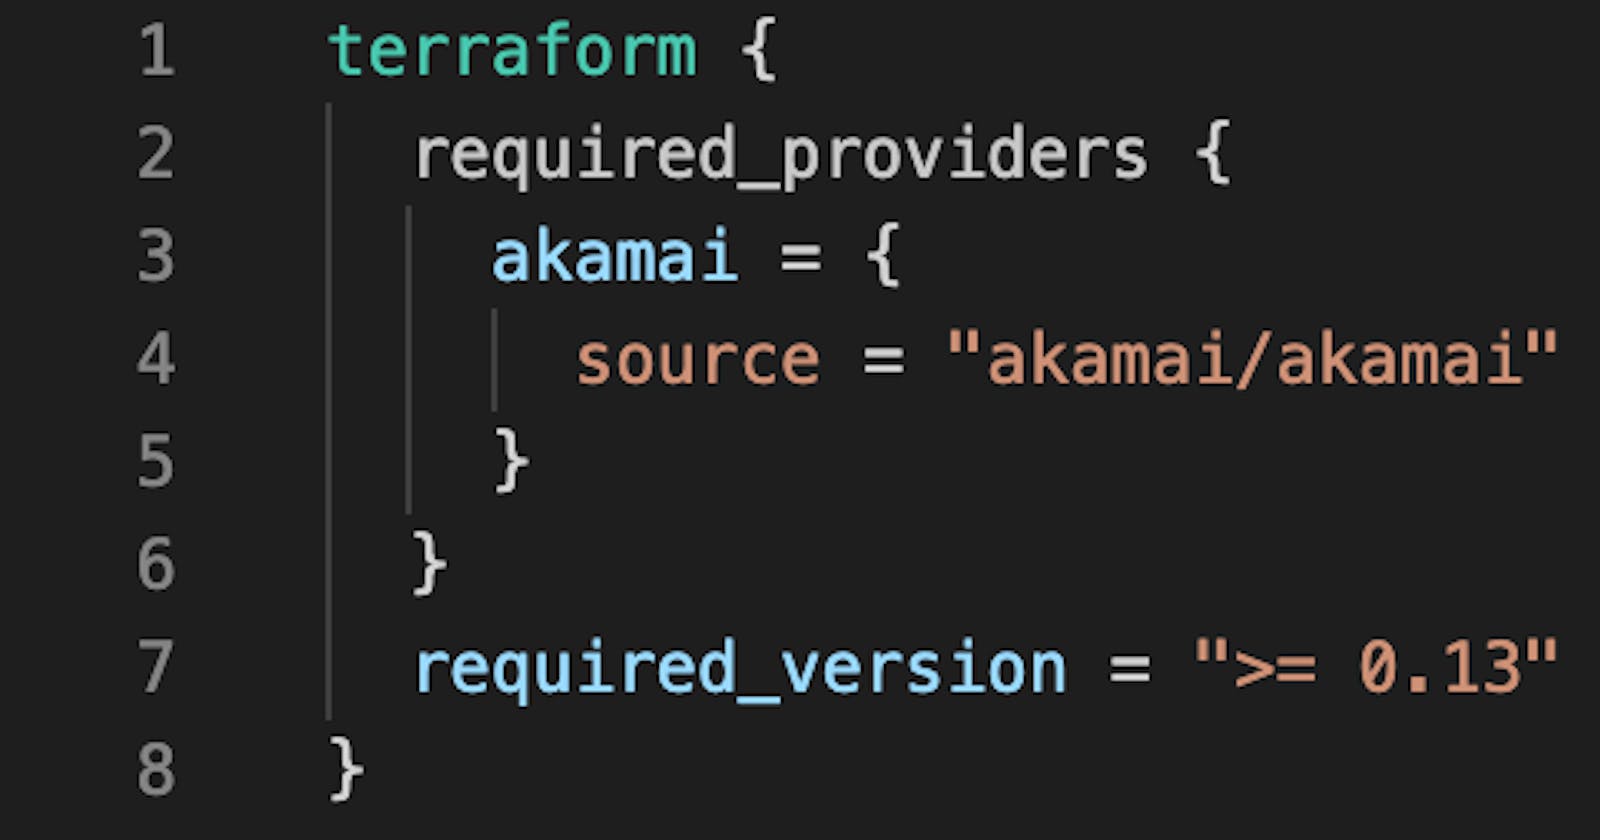 Getting Started with the Akamai Terraform Provider